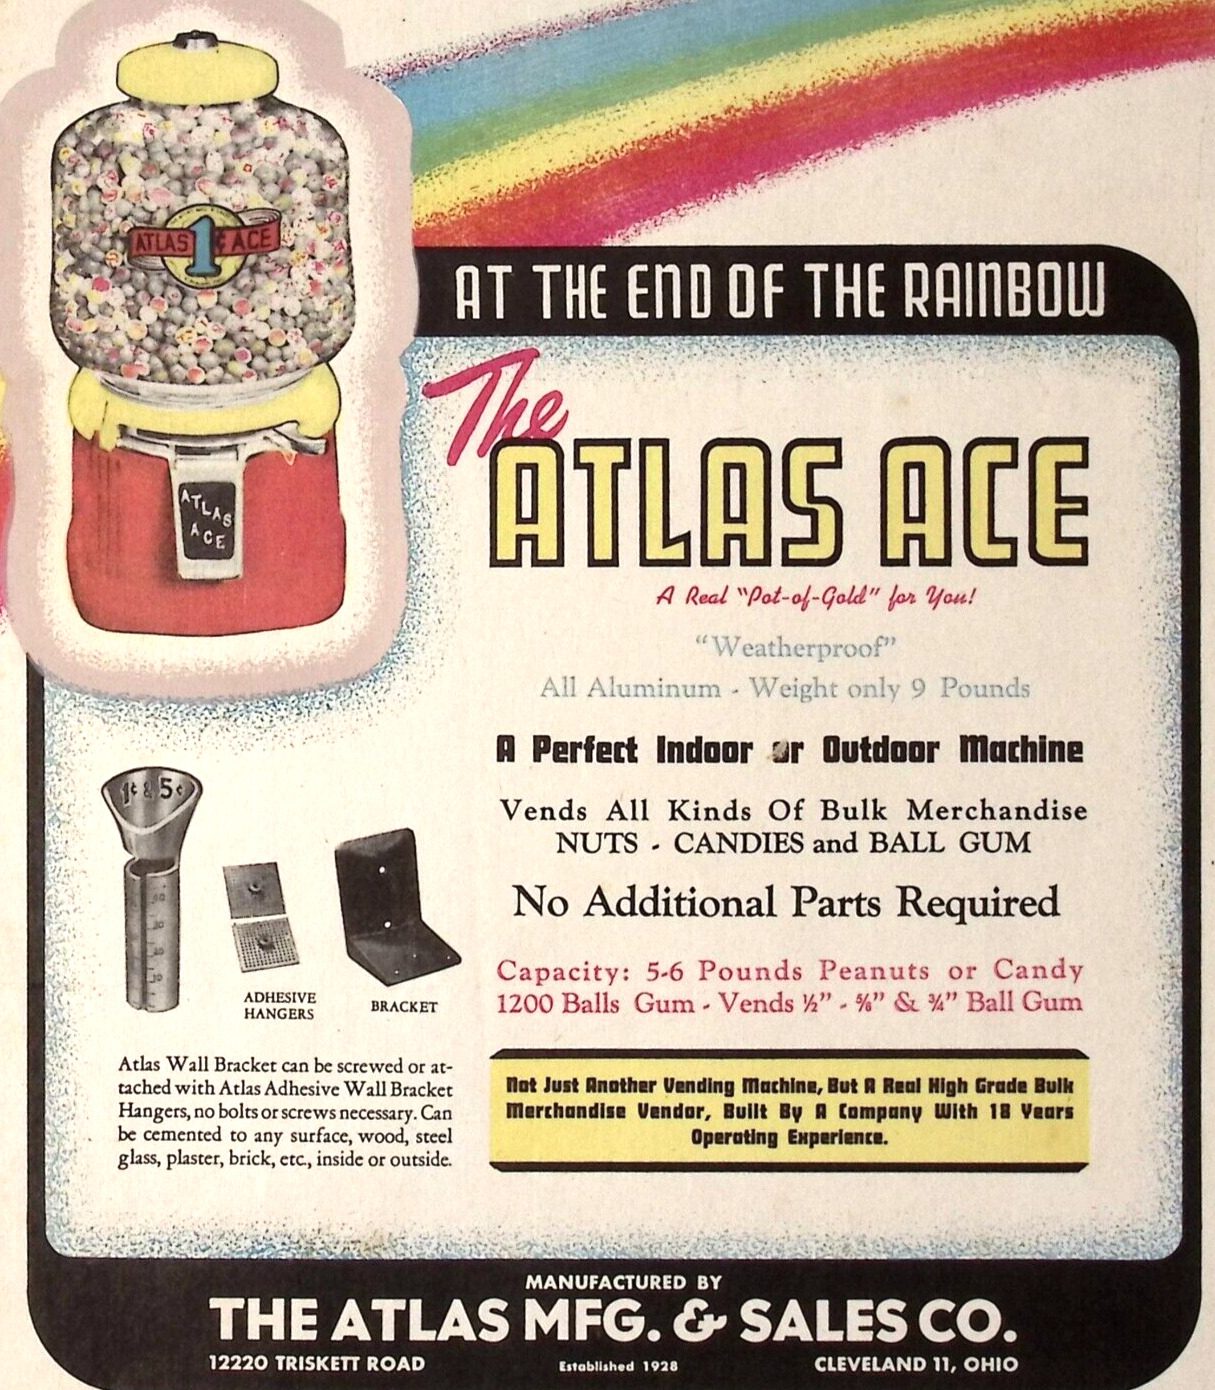 Vintage The Atlas Mfg & Sales Co Atlas Ace Gumball Machine CLEVELAND OH Flyer